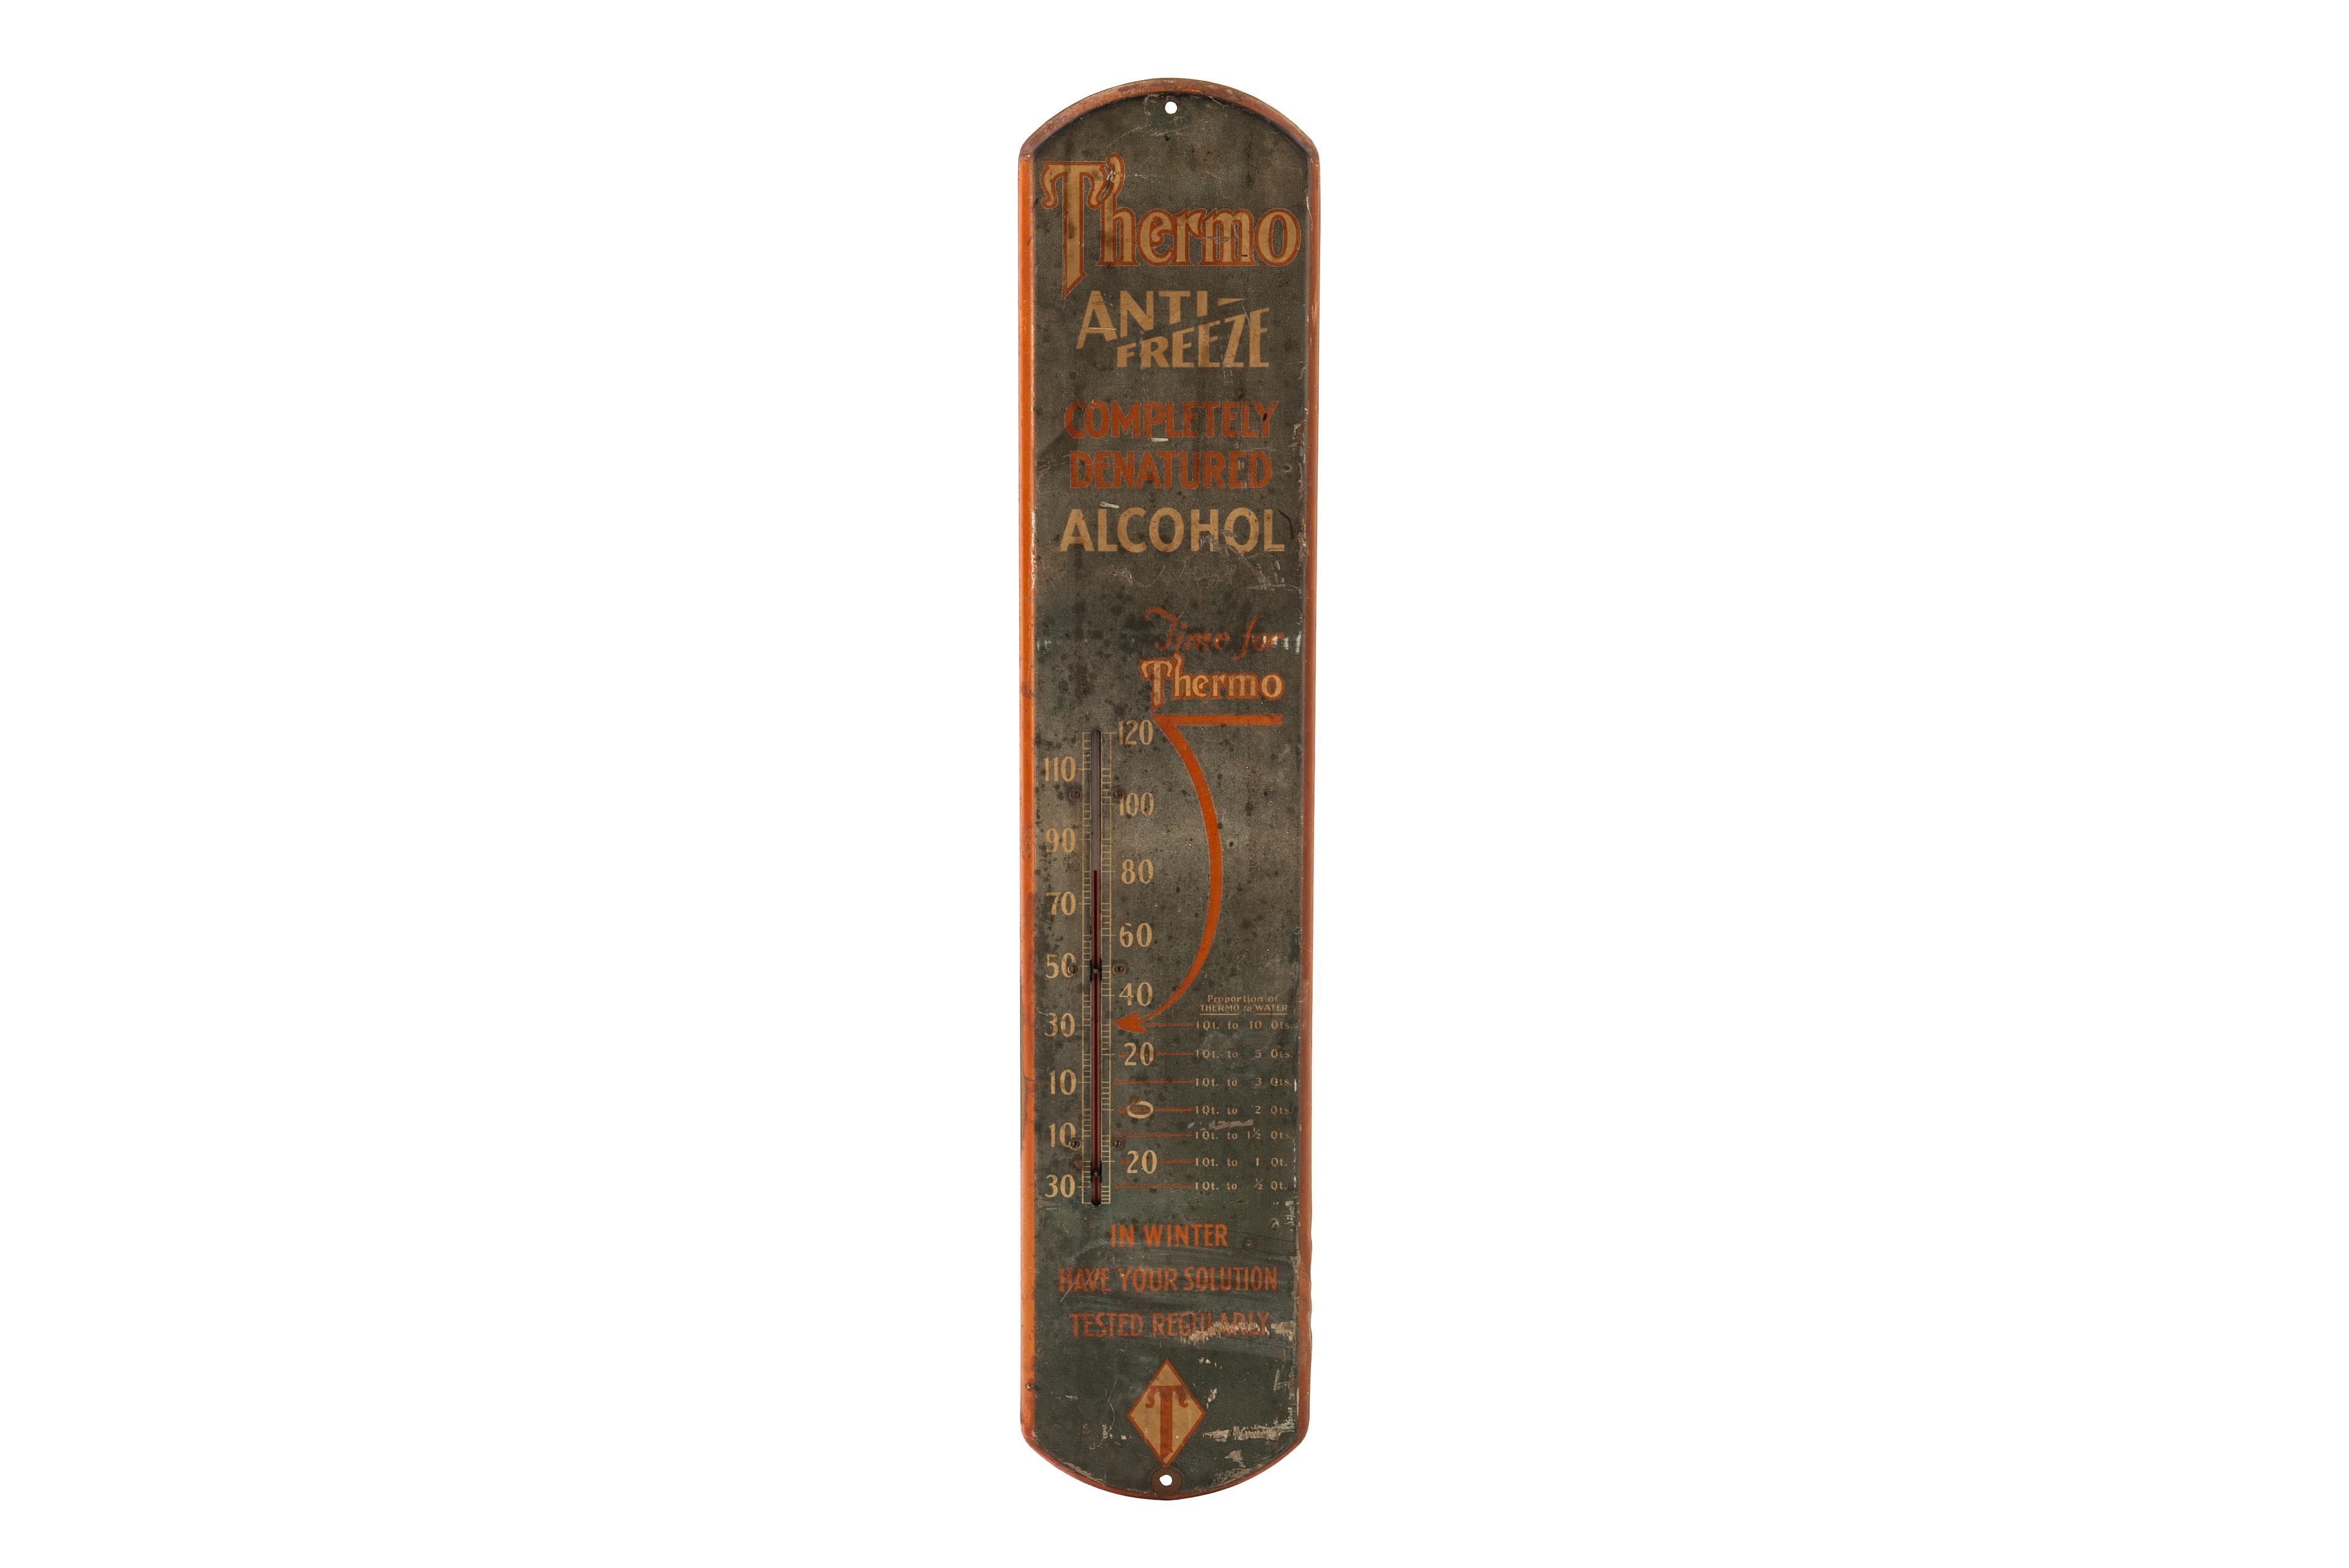 Thermo Anti-freeze "completely Denatured Alcohol" Thermometer